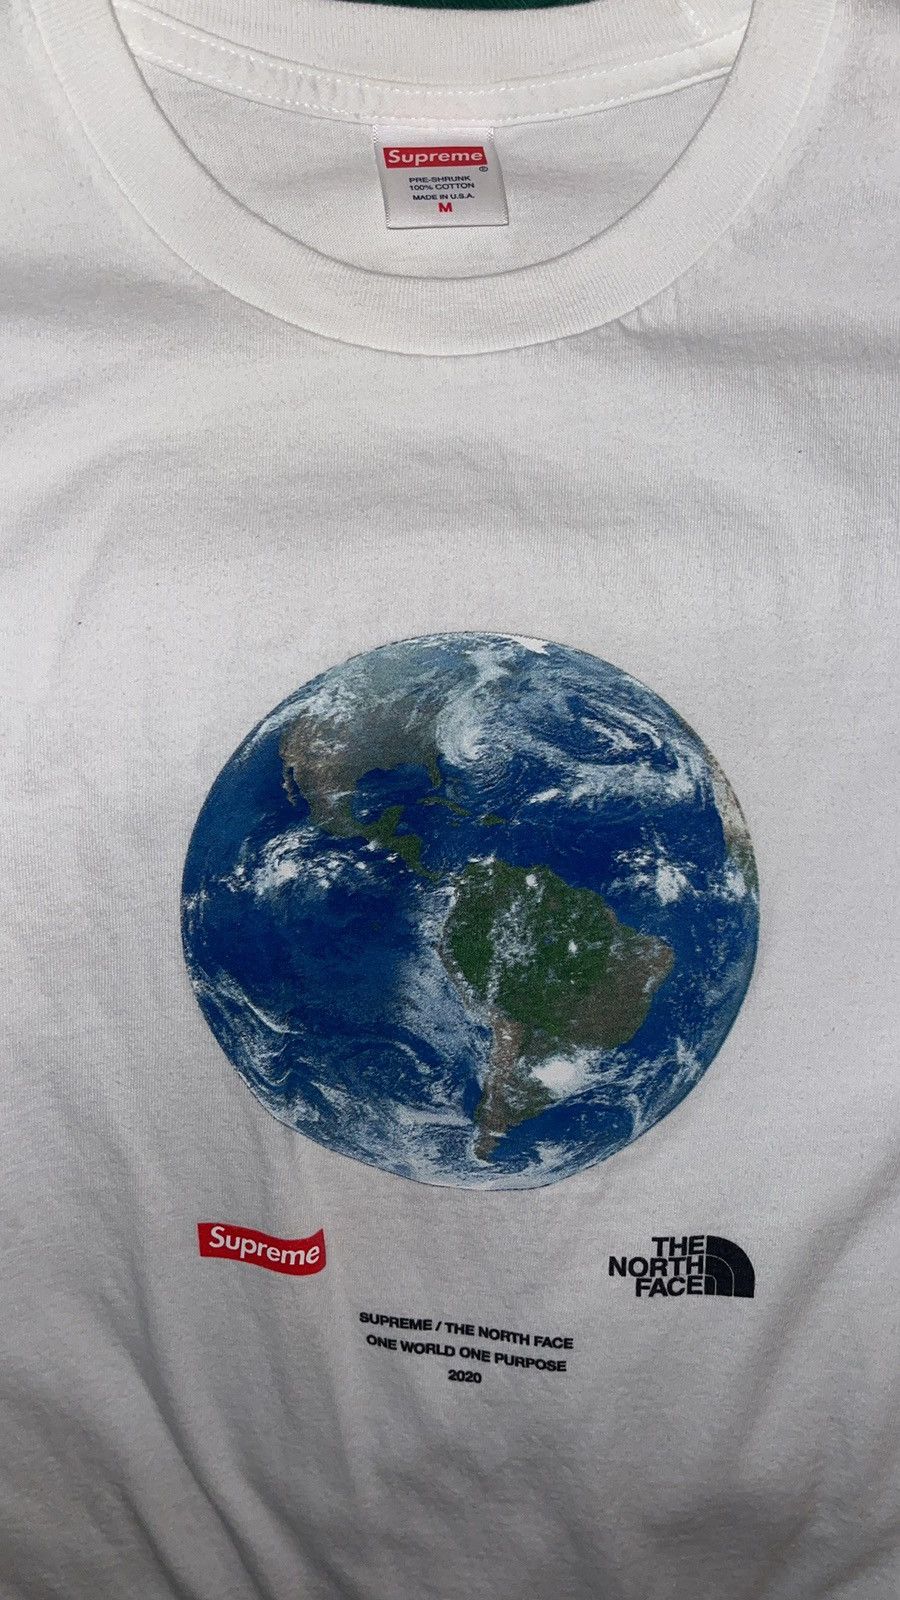 Supreme Supreme The North face 2020 One World T Shirt | Grailed